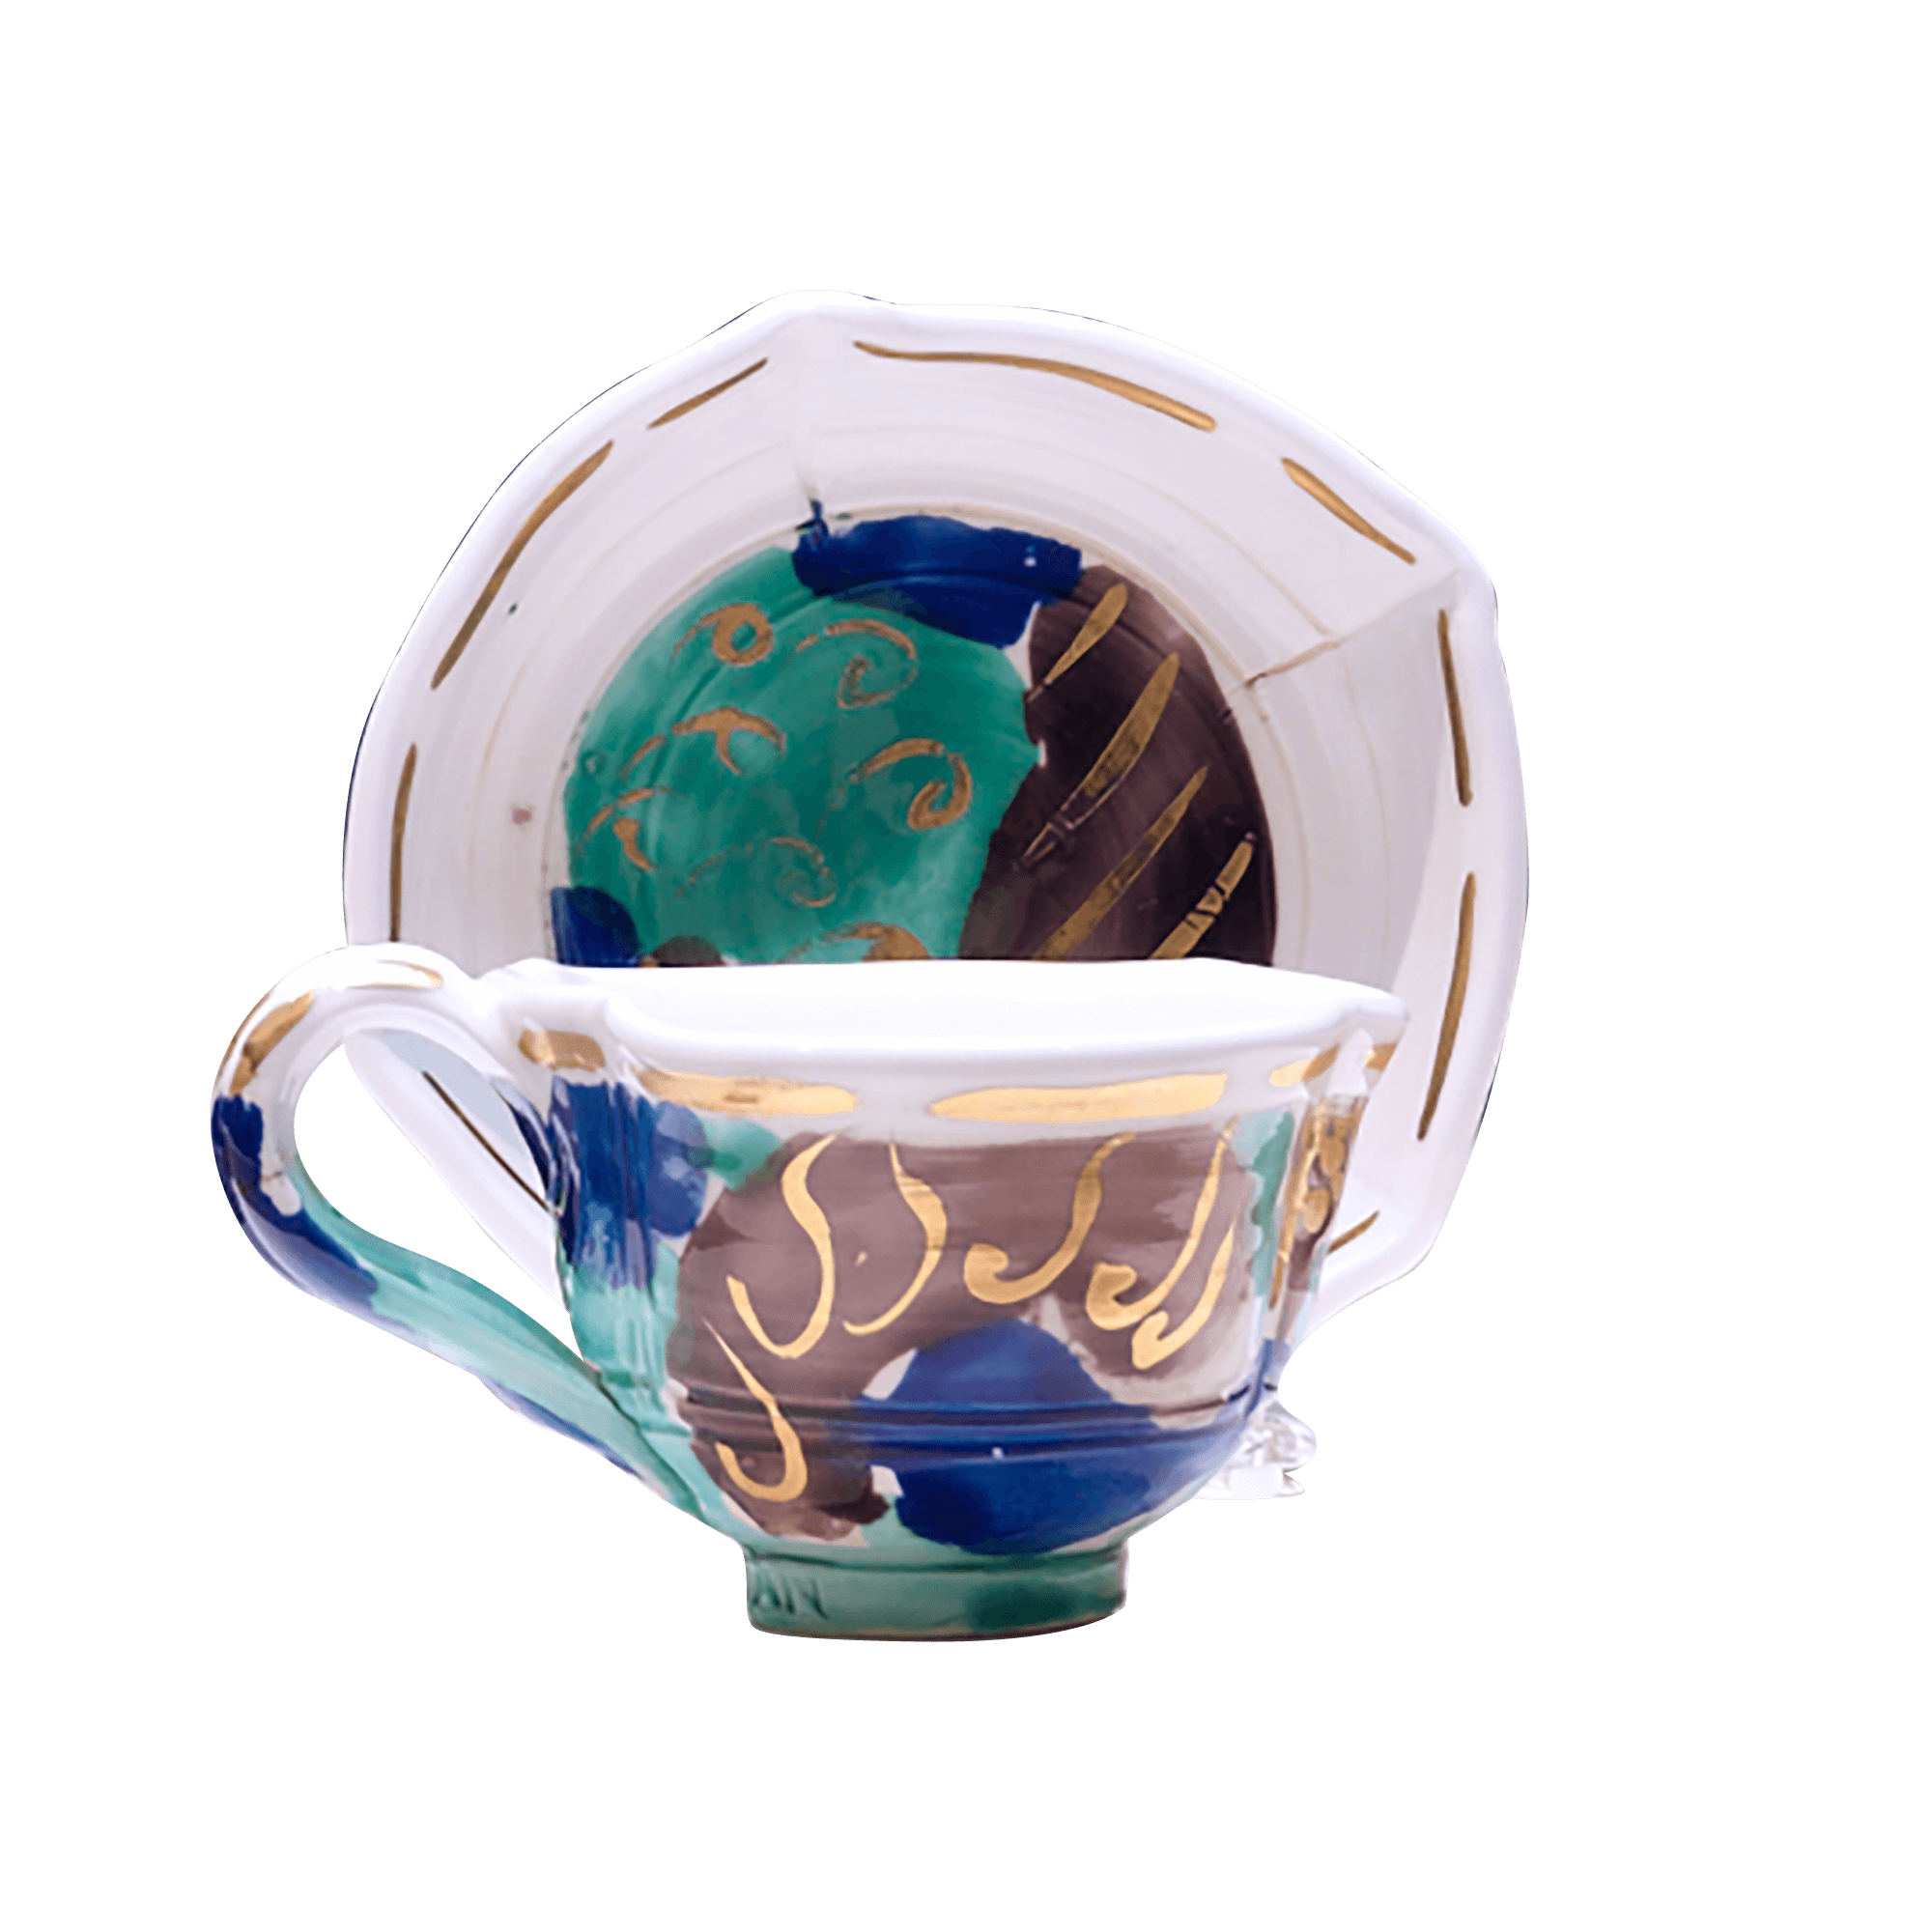 /A%20white%20teacup%20with%20an%20upright%20saucer%20behind%20it.%20Both%20are%20covered%20in%20abstract%20shapes%20of%20brown%2C%20blue%2C%20and%20green%20with%20gold%20lines%20and%20squiggles.